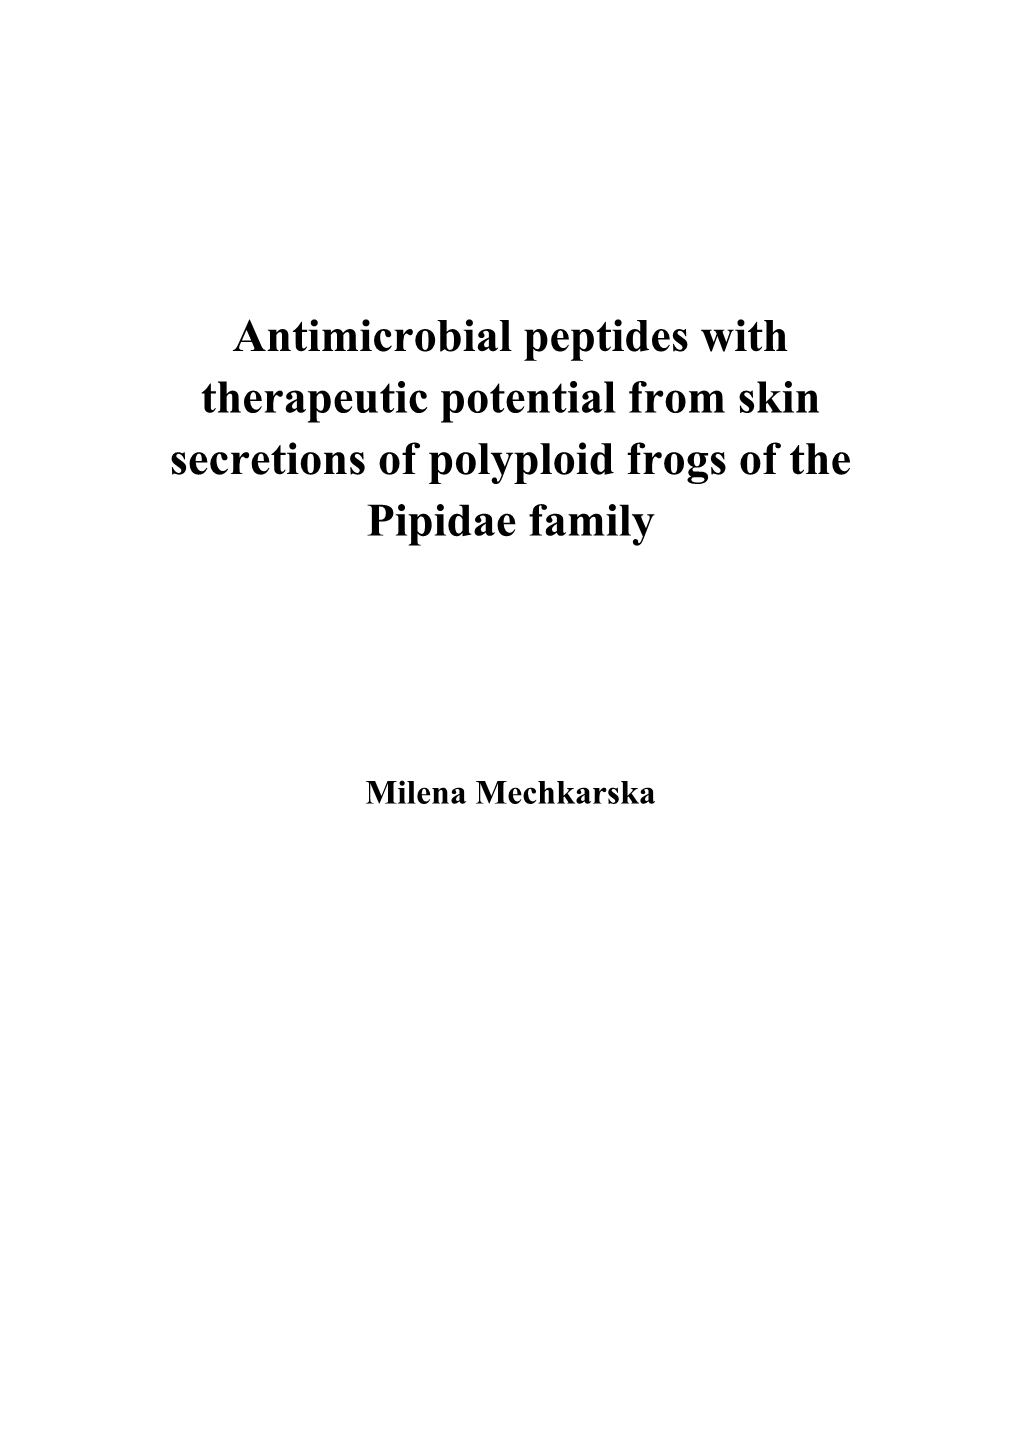 Antimicrobial Peptides with Therapeutic Potential from Skin Secretions of Polyploid Frogs of the Pipidae Family